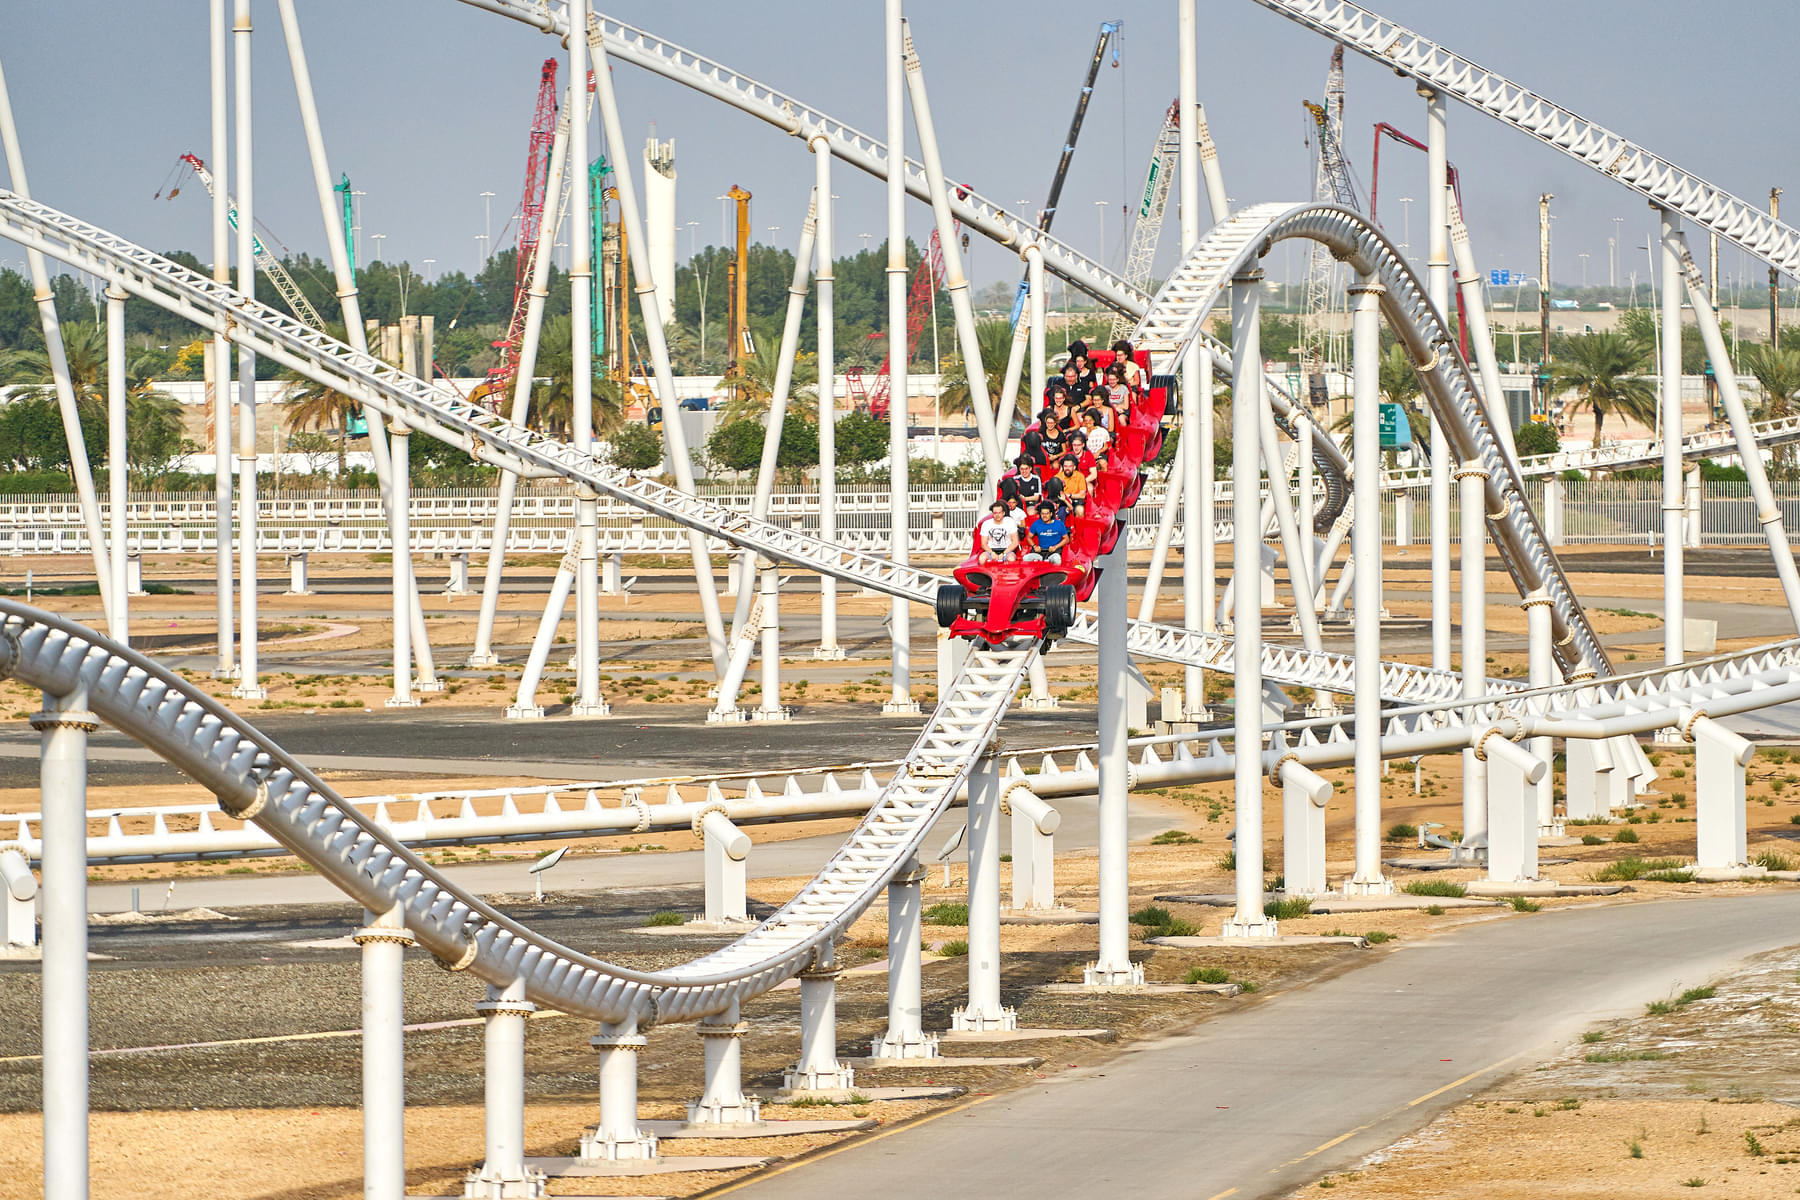 Experience the thrill of Formula Rossa